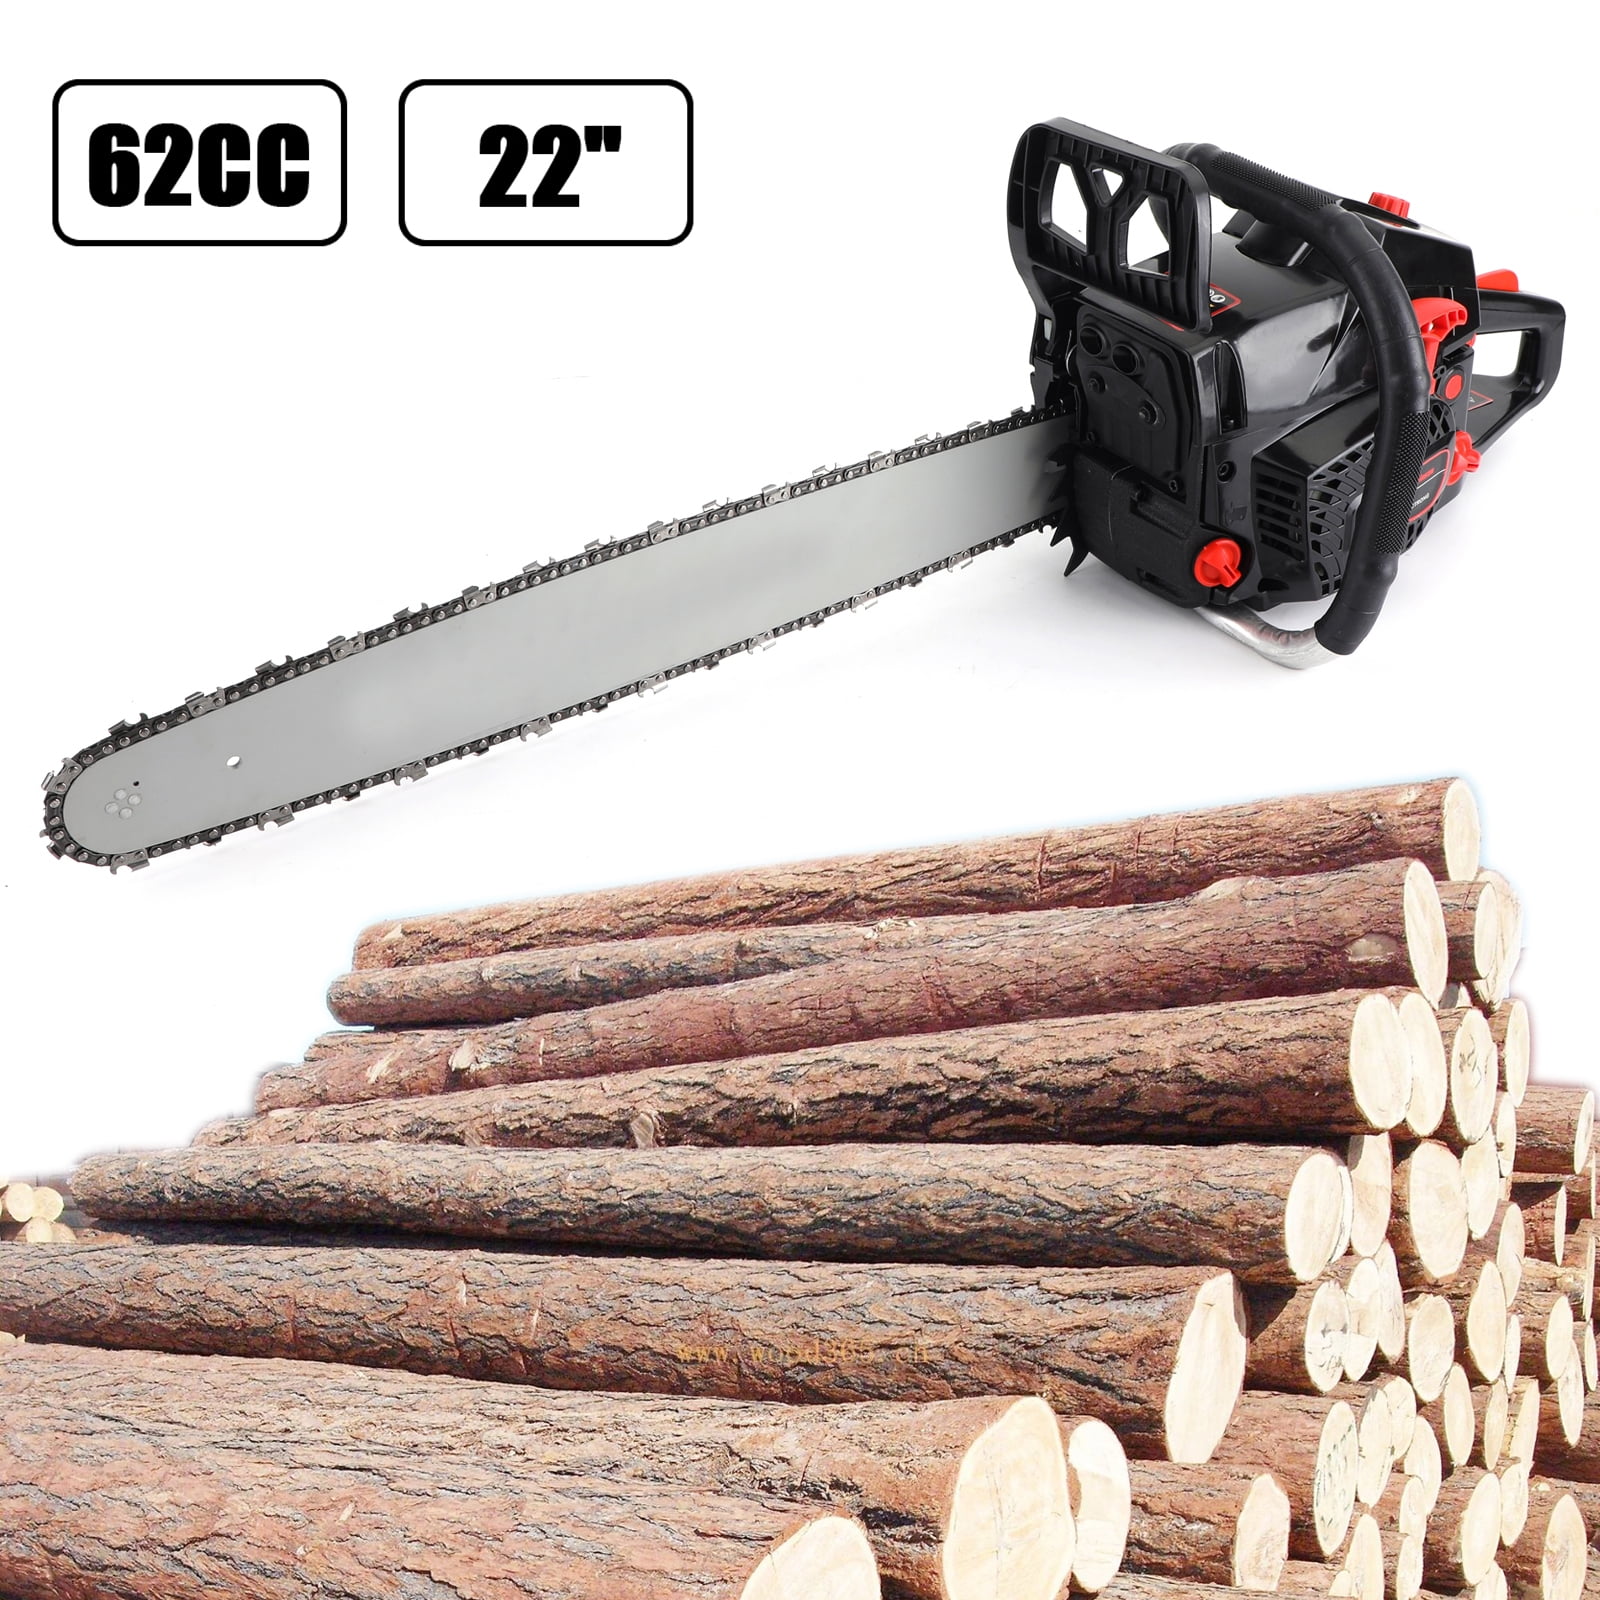 Details about   COOCHEER 62CC 20" Gas Chainsaw 2 Stroke Handed Petrol Chain Woodcutting 4 B e 15